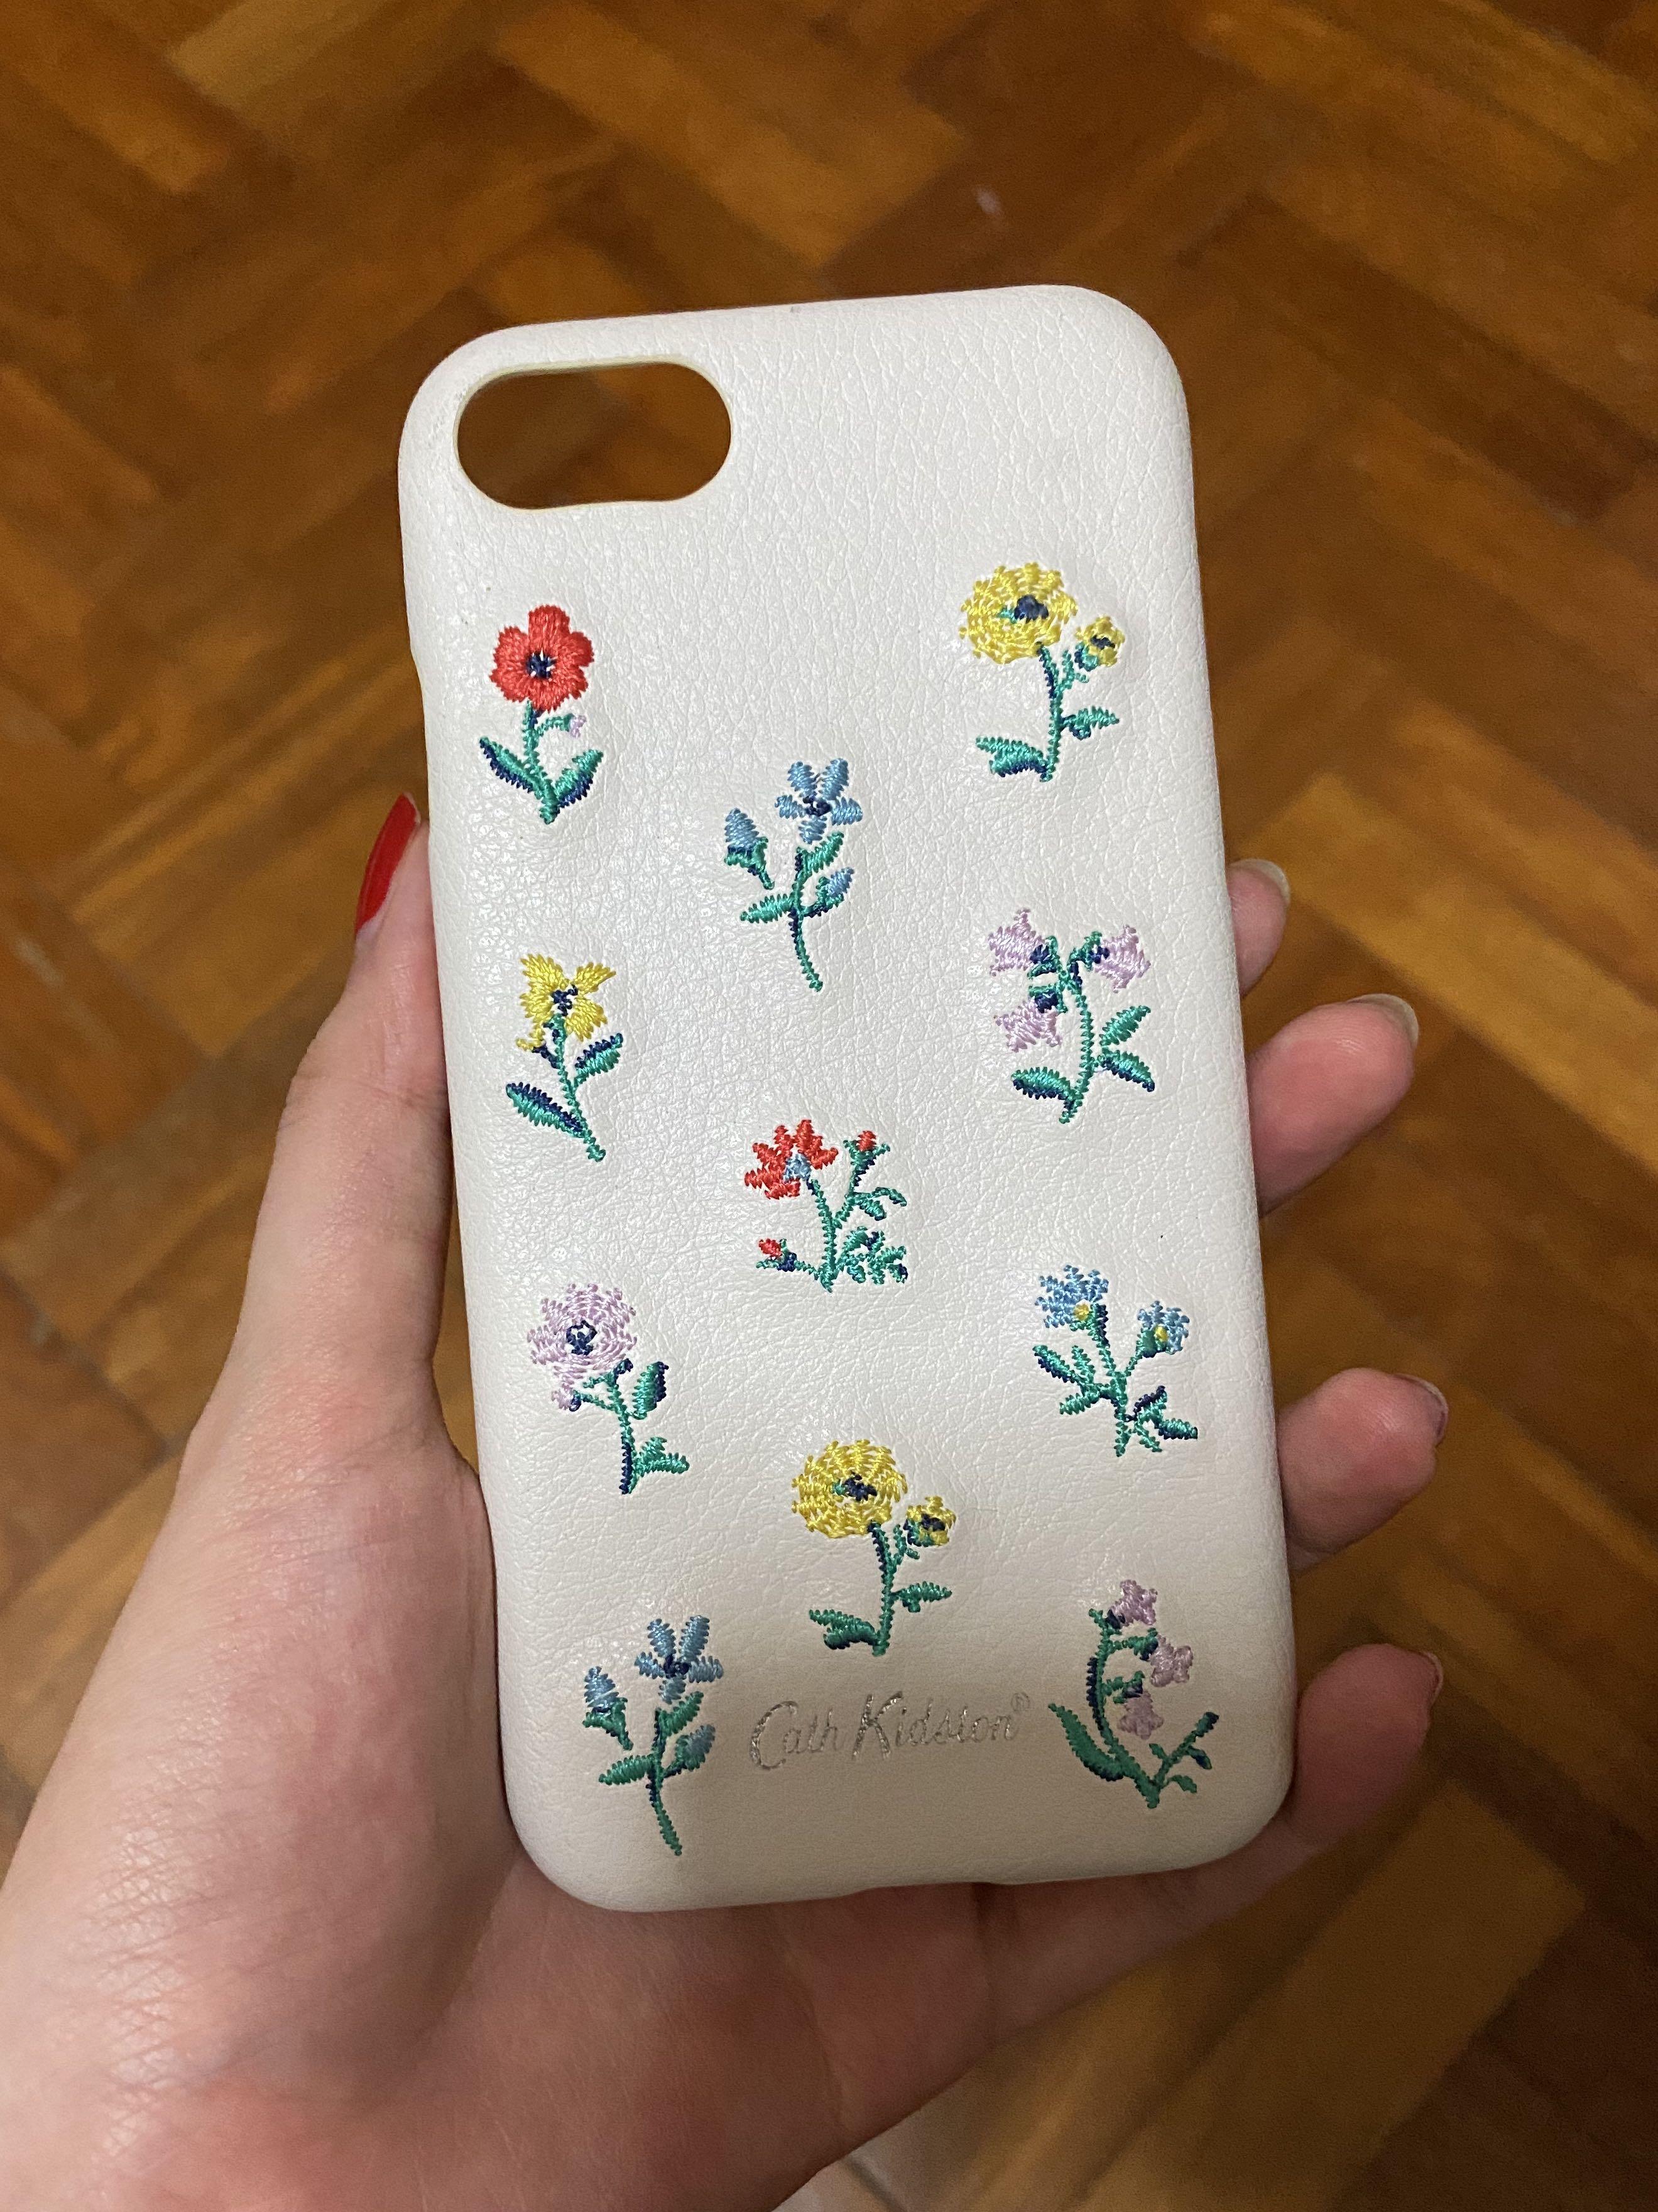 cath kidston mobile phone covers